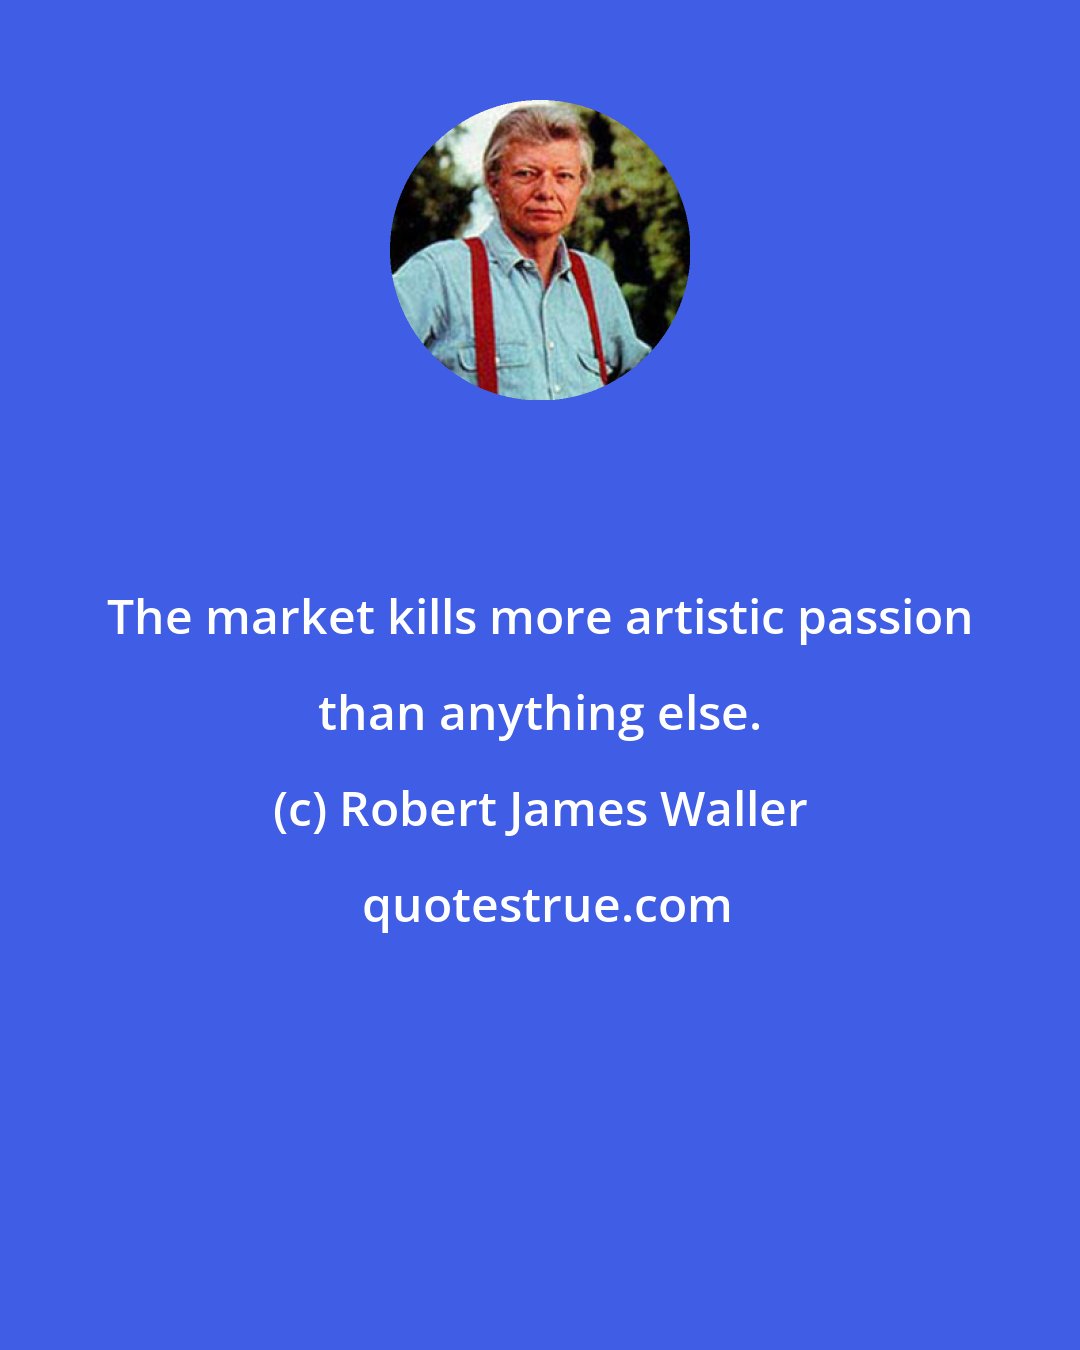 Robert James Waller: The market kills more artistic passion than anything else.